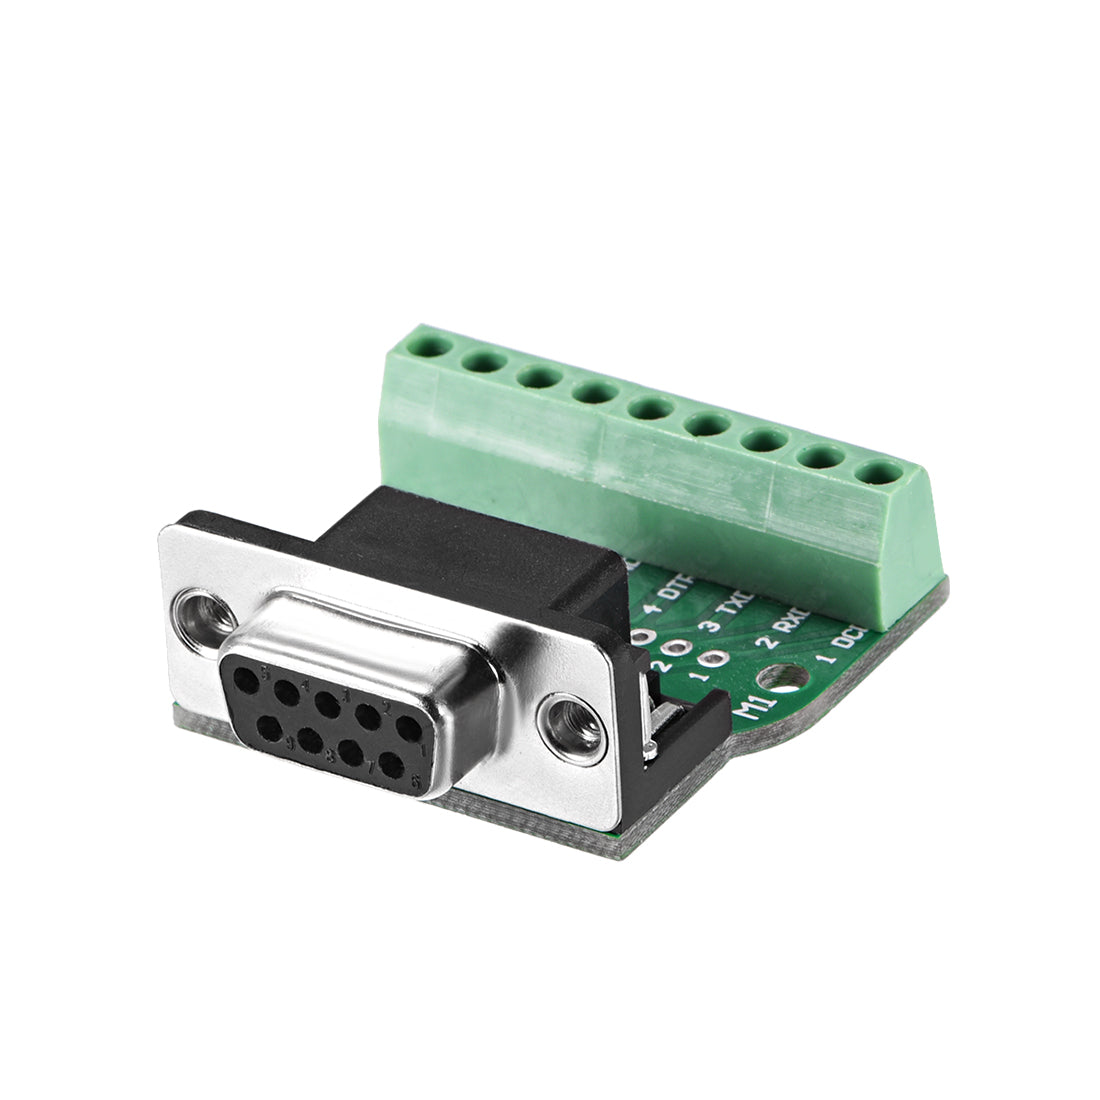 uxcell Uxcell D-sub DB9 Breakout Board Connector 9 Pin 2 Row Female RS232 Serial Port Solderless Terminal Block Adapter